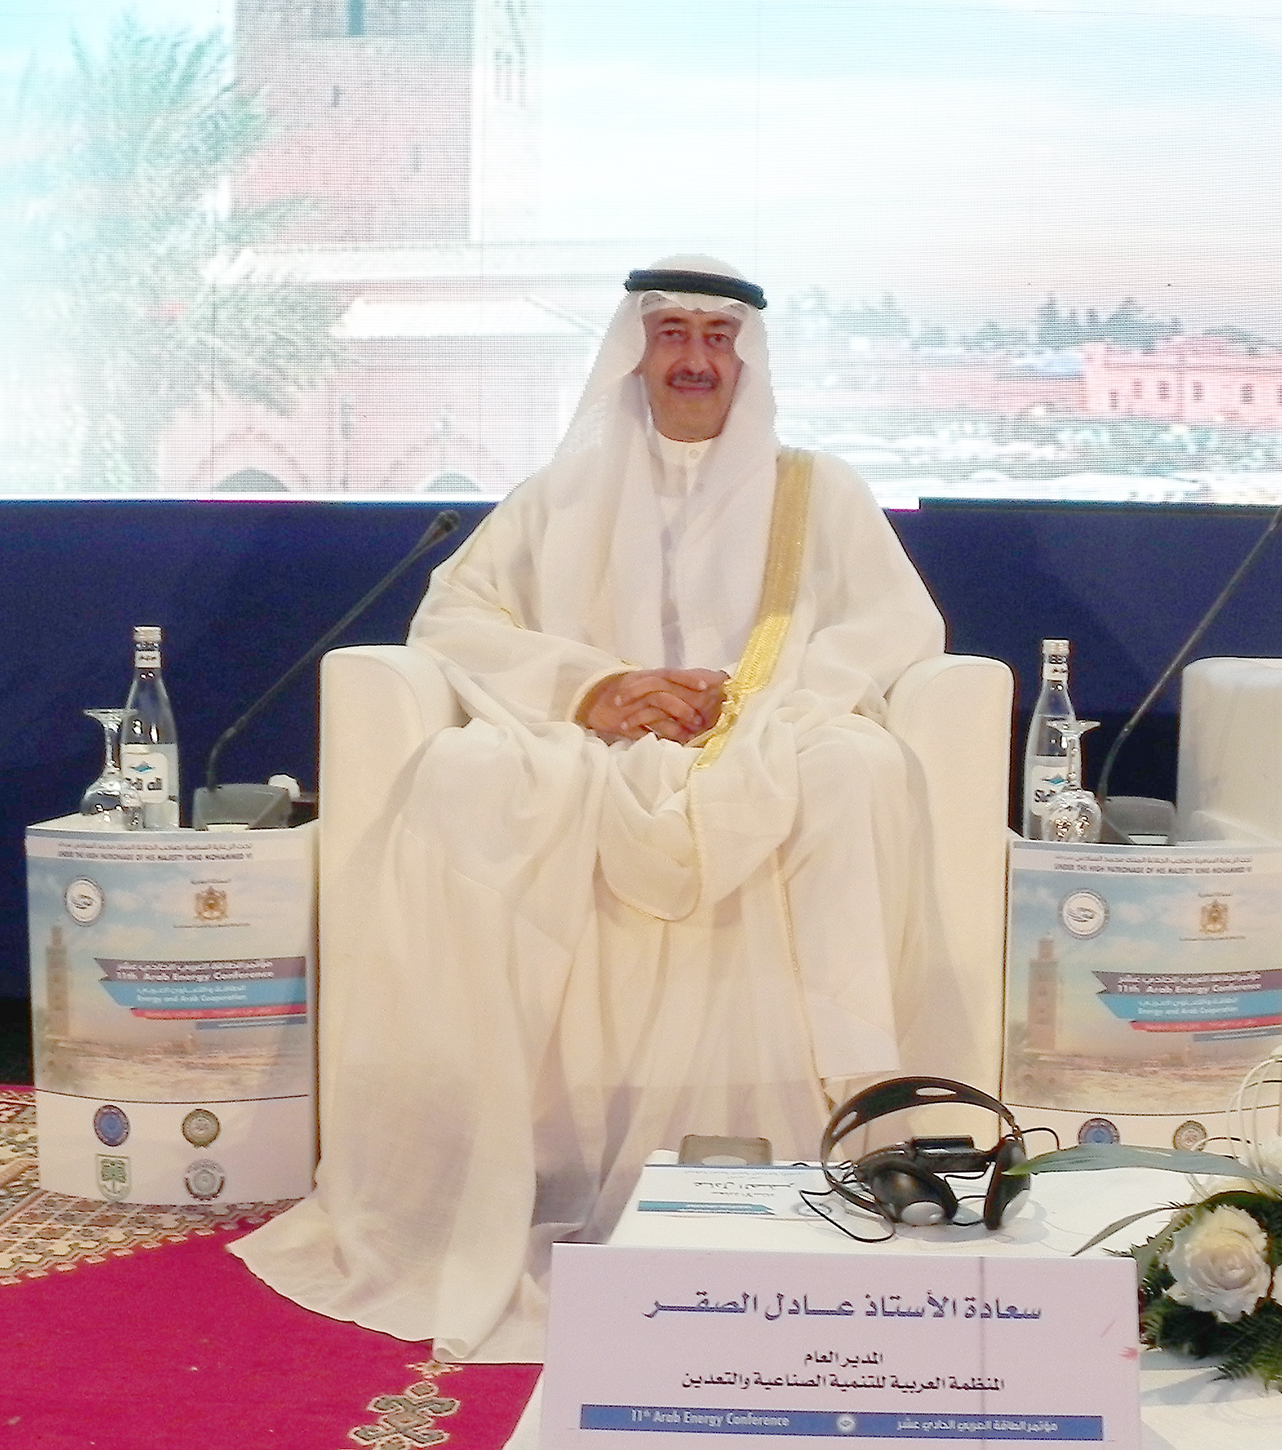 Director General of the Arab Industrial Development and Mining Organization (AIDMO) Eng. Adel Al-Sager